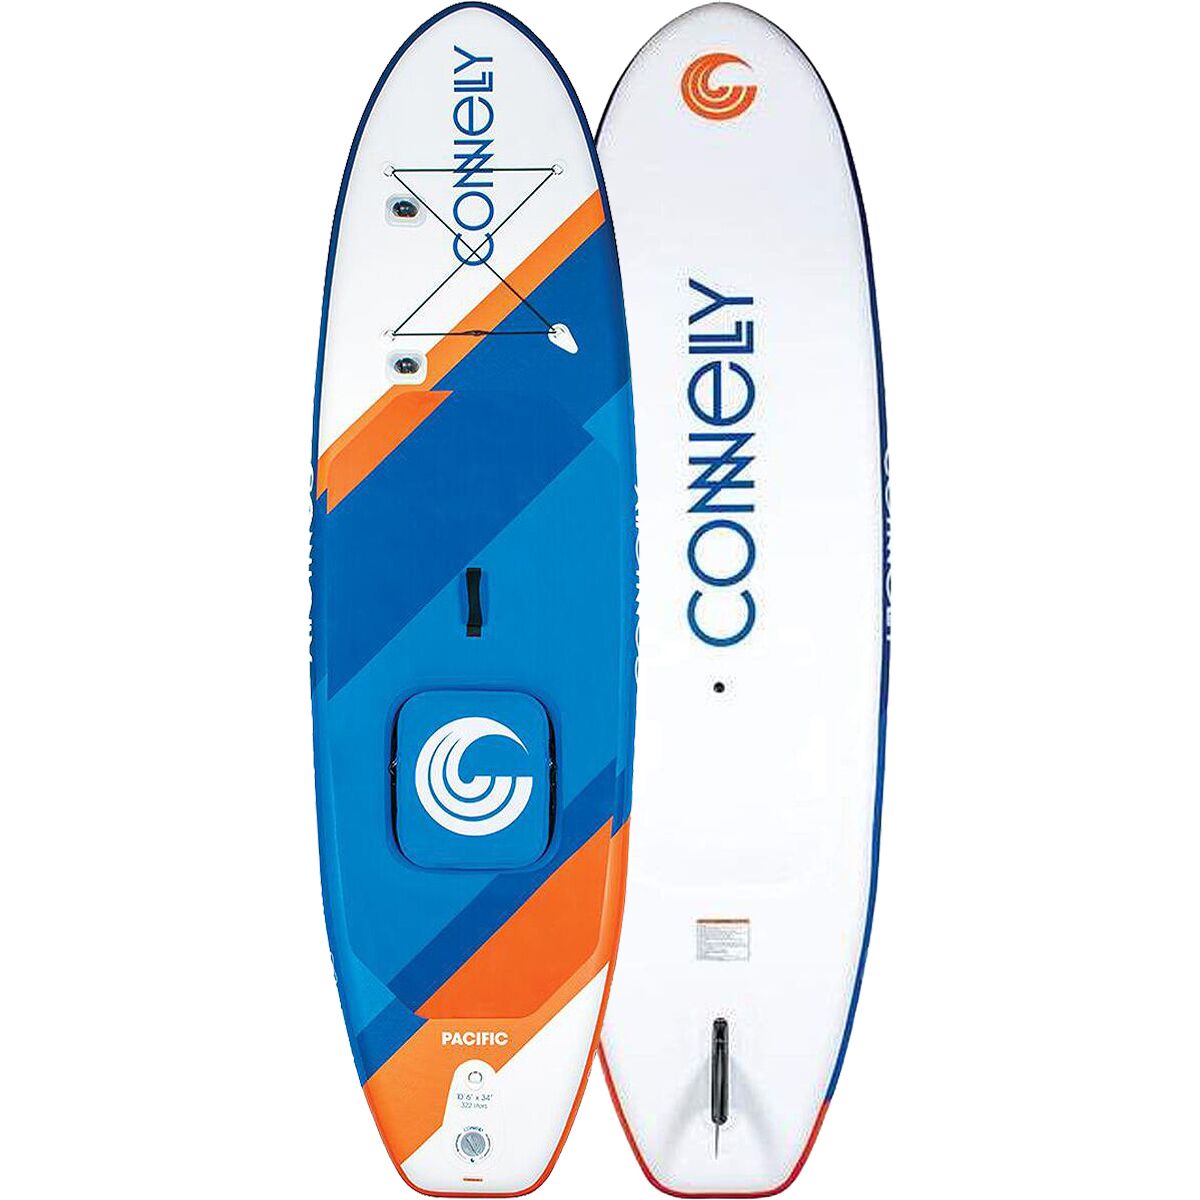 Connelly Skis Pacific Inflatable Stand-Up Paddleboard + Seat